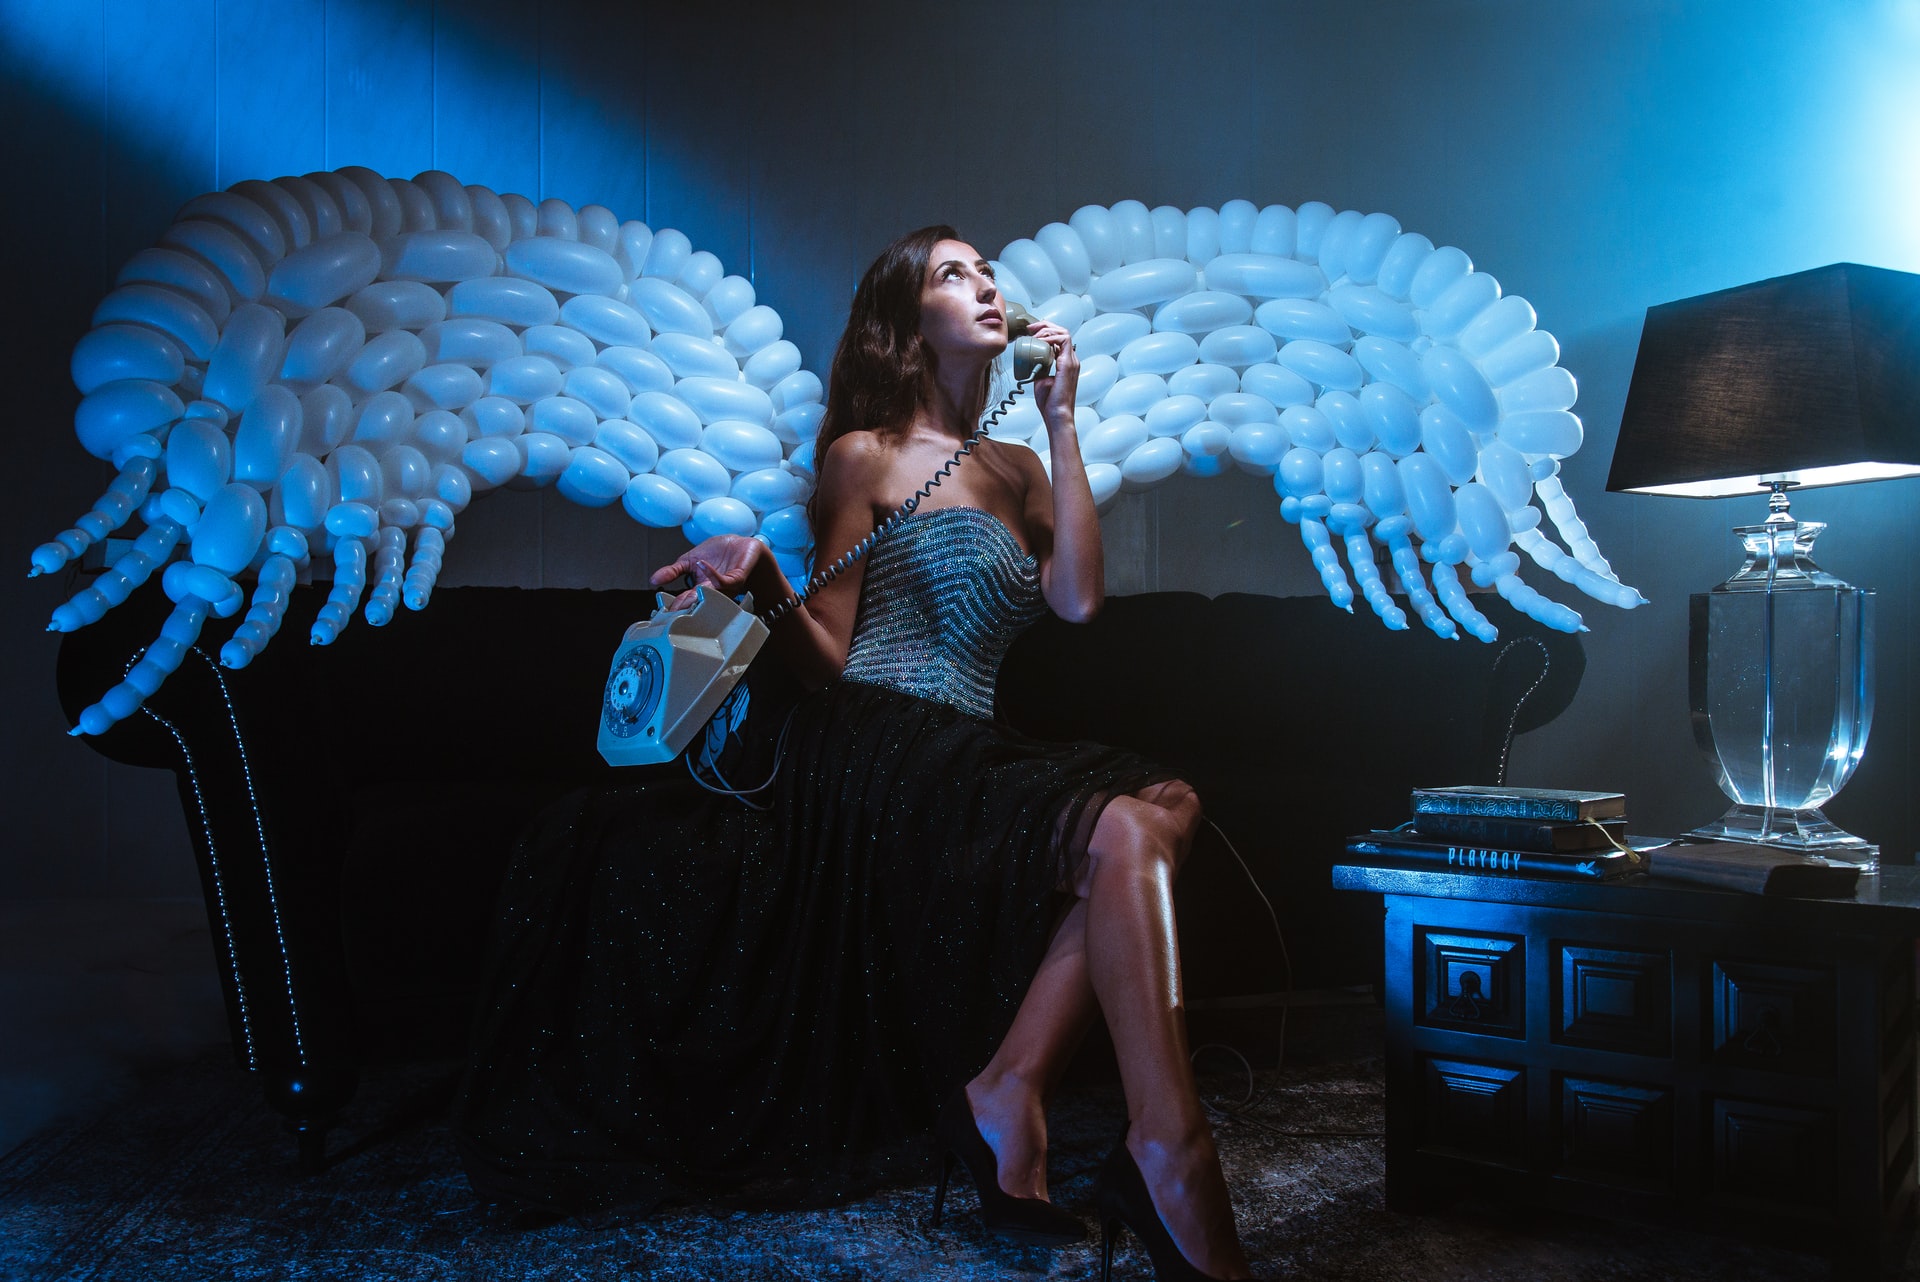 A Girl With White Angel Wings Holding A Telephone